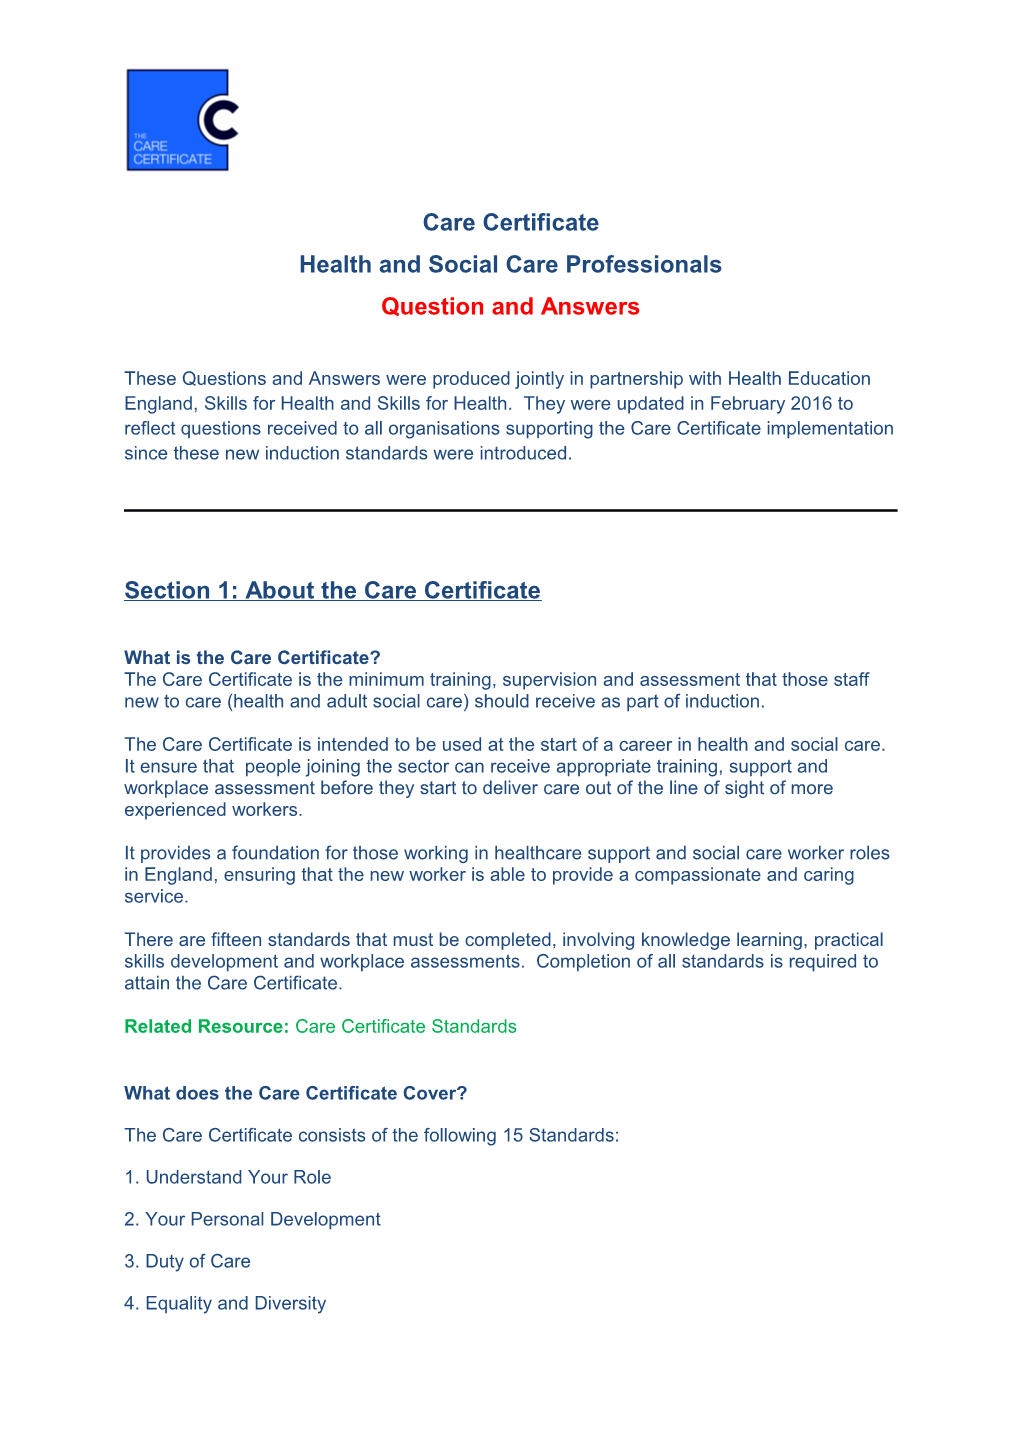 Care Certificate - Question and Answers for Health and Adult Social Care